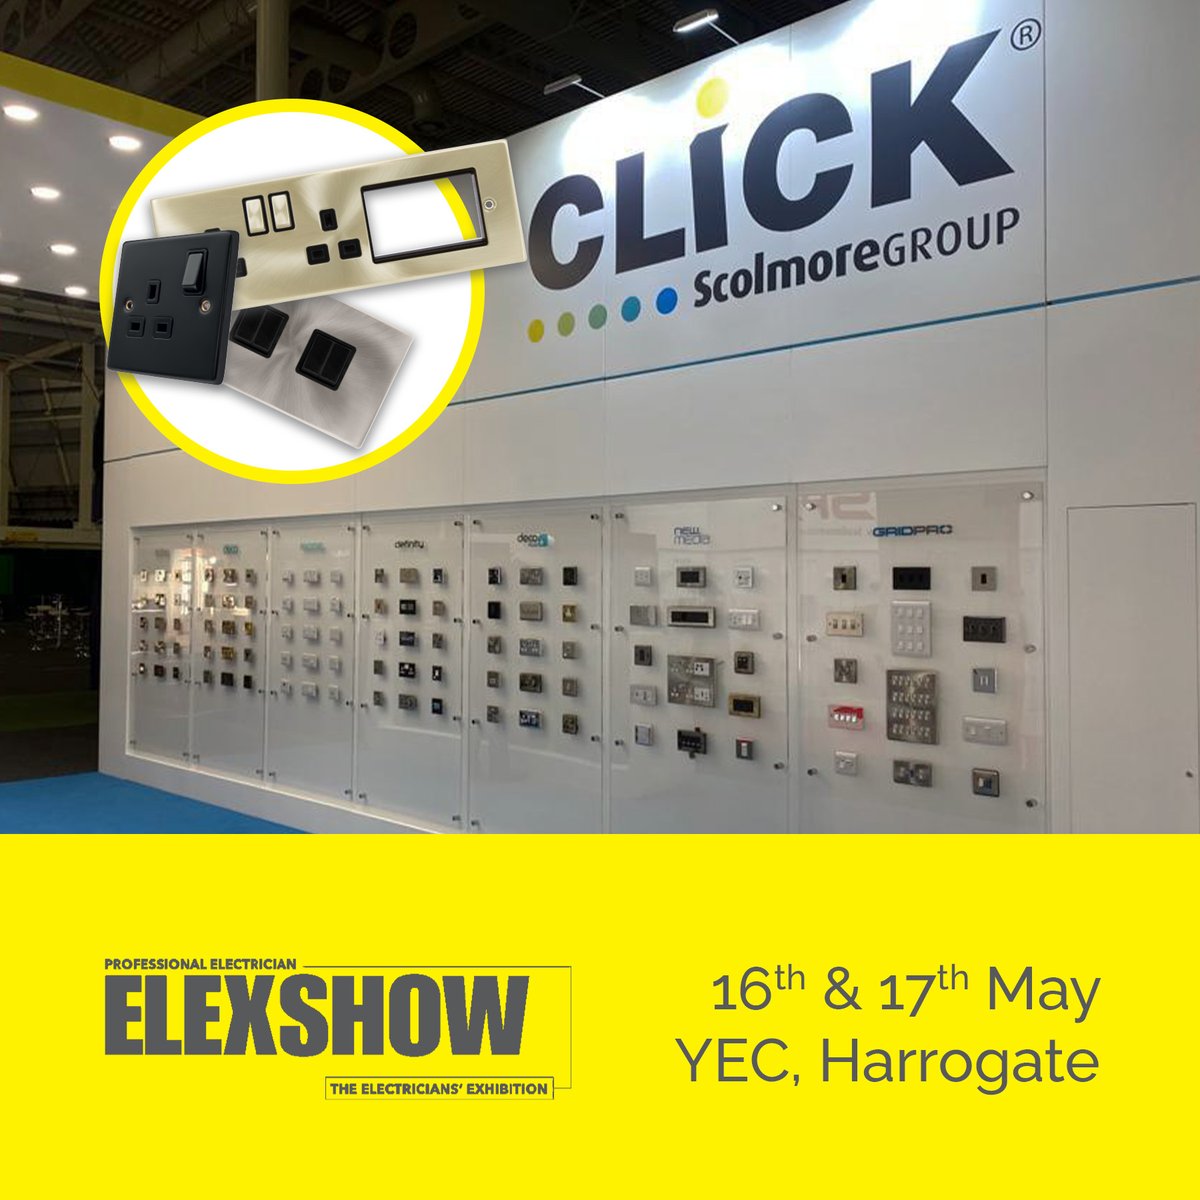 📅 We're just 4 weeks away from @Elexshow in Harrogate! The friendly experts from #ClickScolmore will be there to answer your wiring accessory questions 🙋 Follow the link to register for your FREE entry 👇 ⚡ registration.hamerville.events/exf/no1pkpq5eu… #Elex #ElexShow #ElexHarrogate